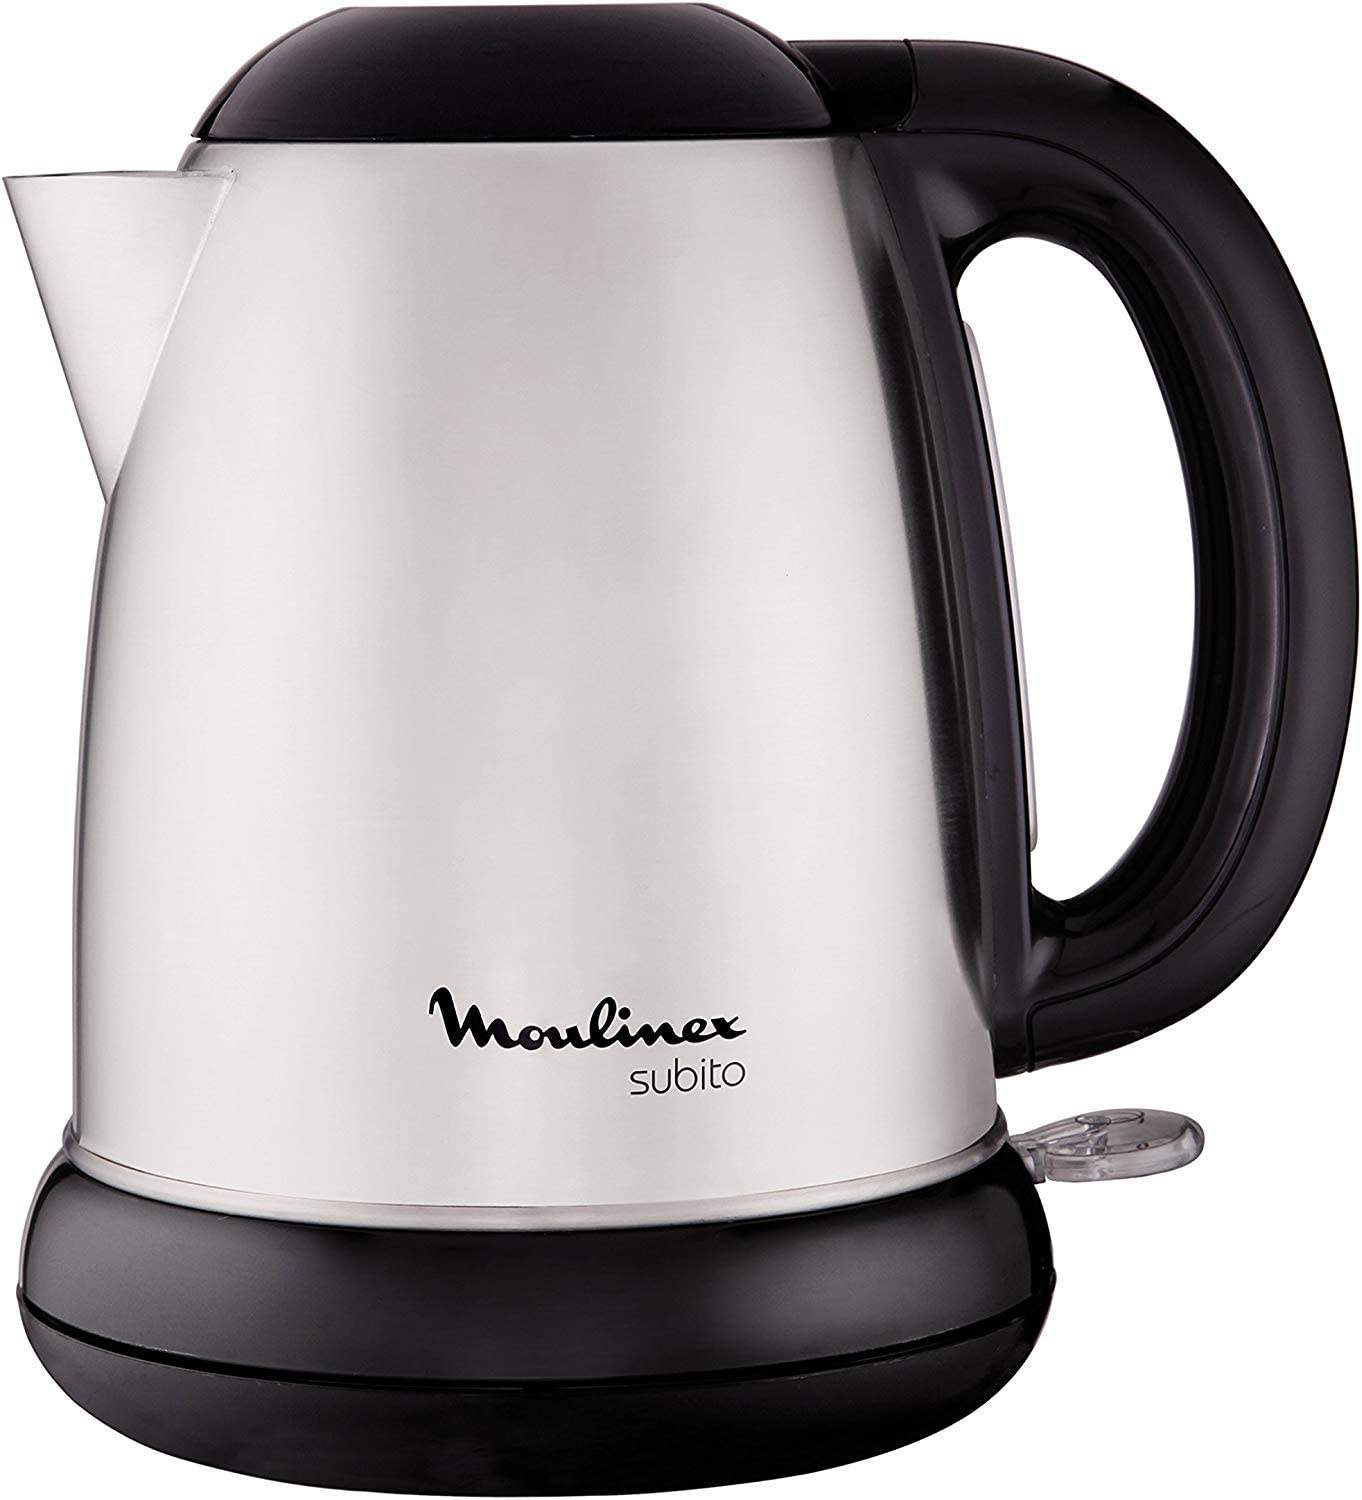  Moulinex electric kettle Subito, 1.7l, black and stainless steel